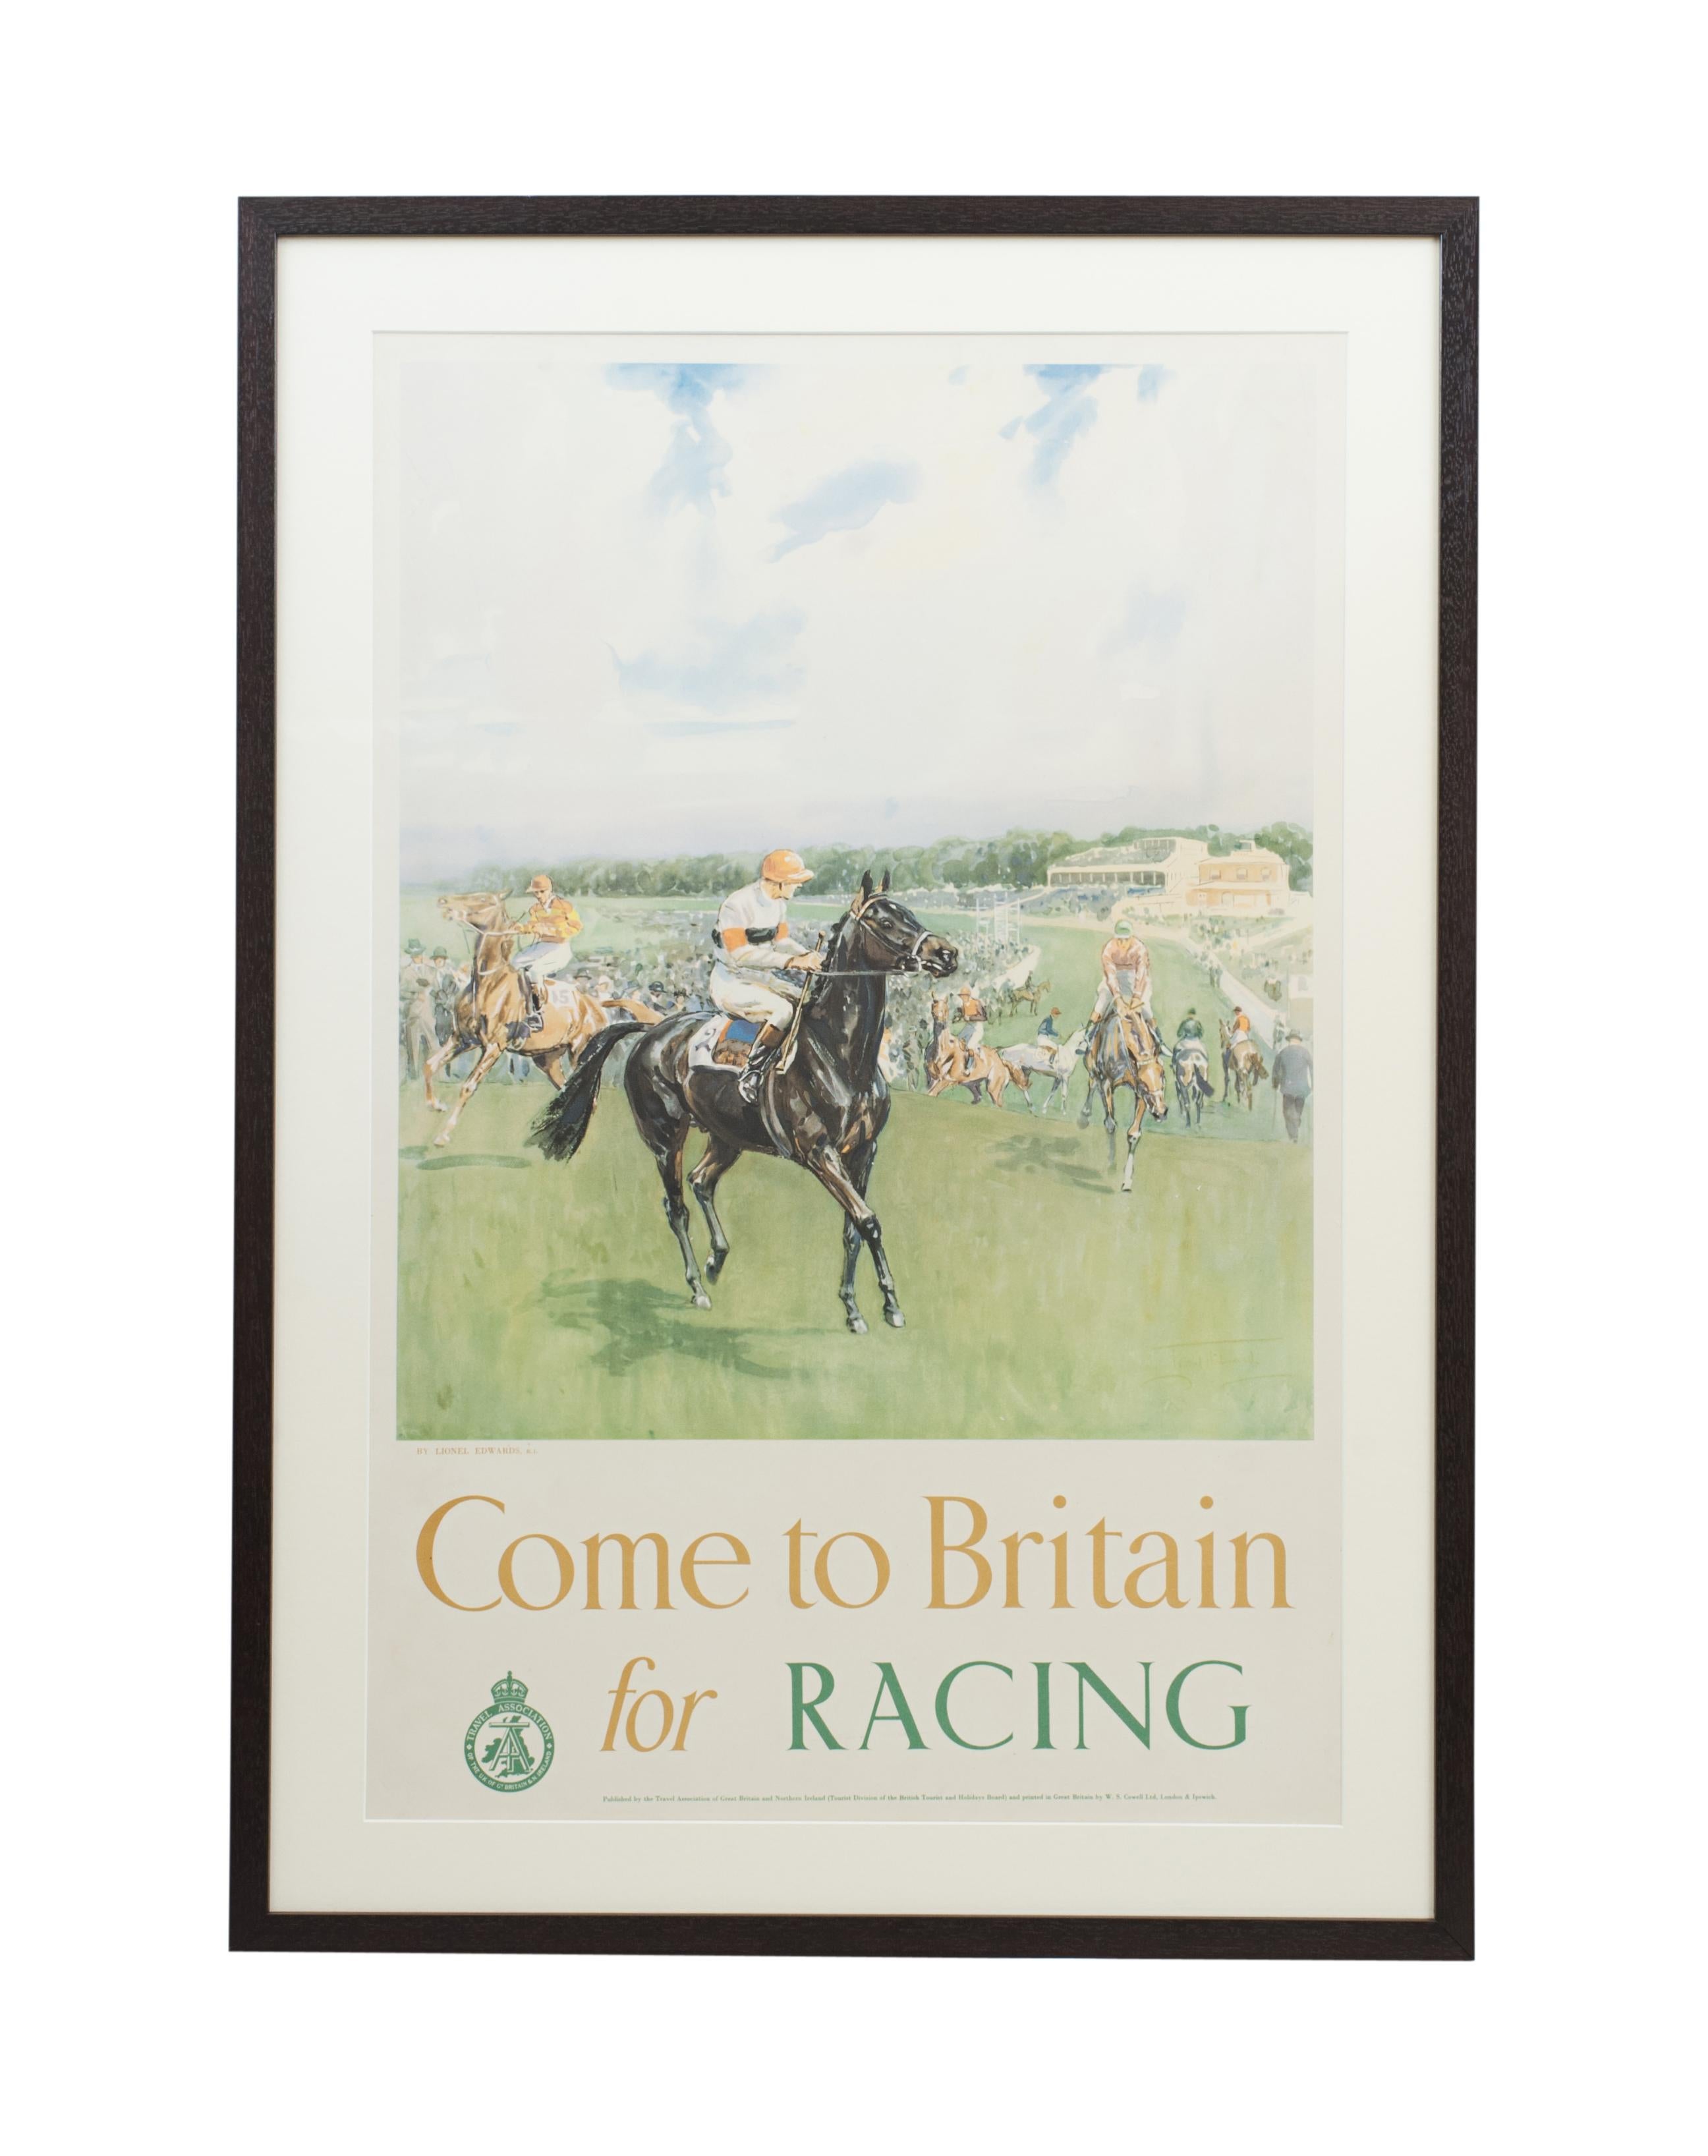 Sporting Art Travel Poster by Lionel Edwards, Come to Britain for Racing Poster For Sale